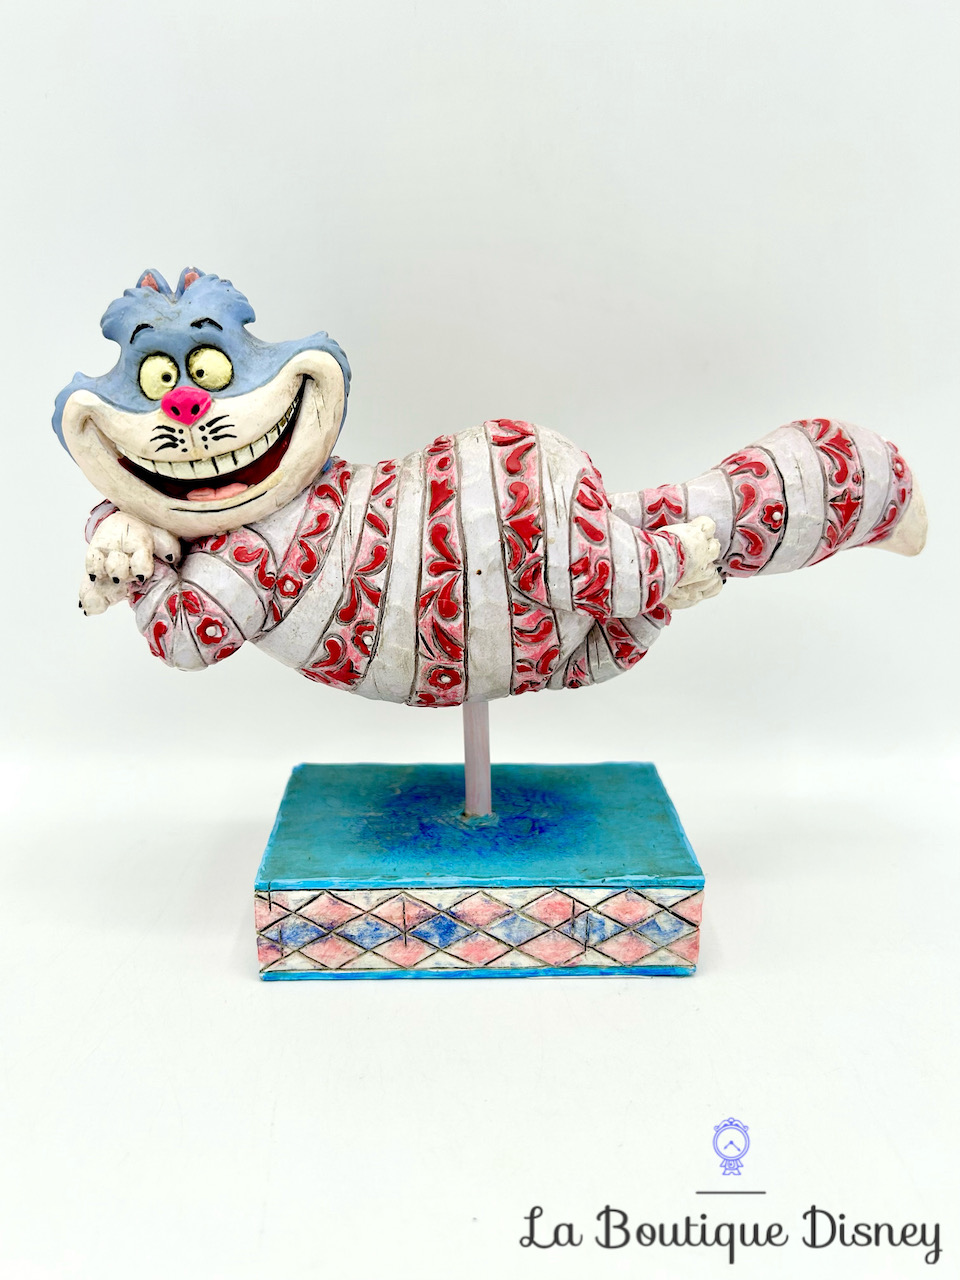 figurine-jim-shore-grinning-cheshire-alice-in-wonderland-disney-traditions-showcase-collection-enesco-4007211-alice-au-pays-des-merveilles-chat-cheshire-0